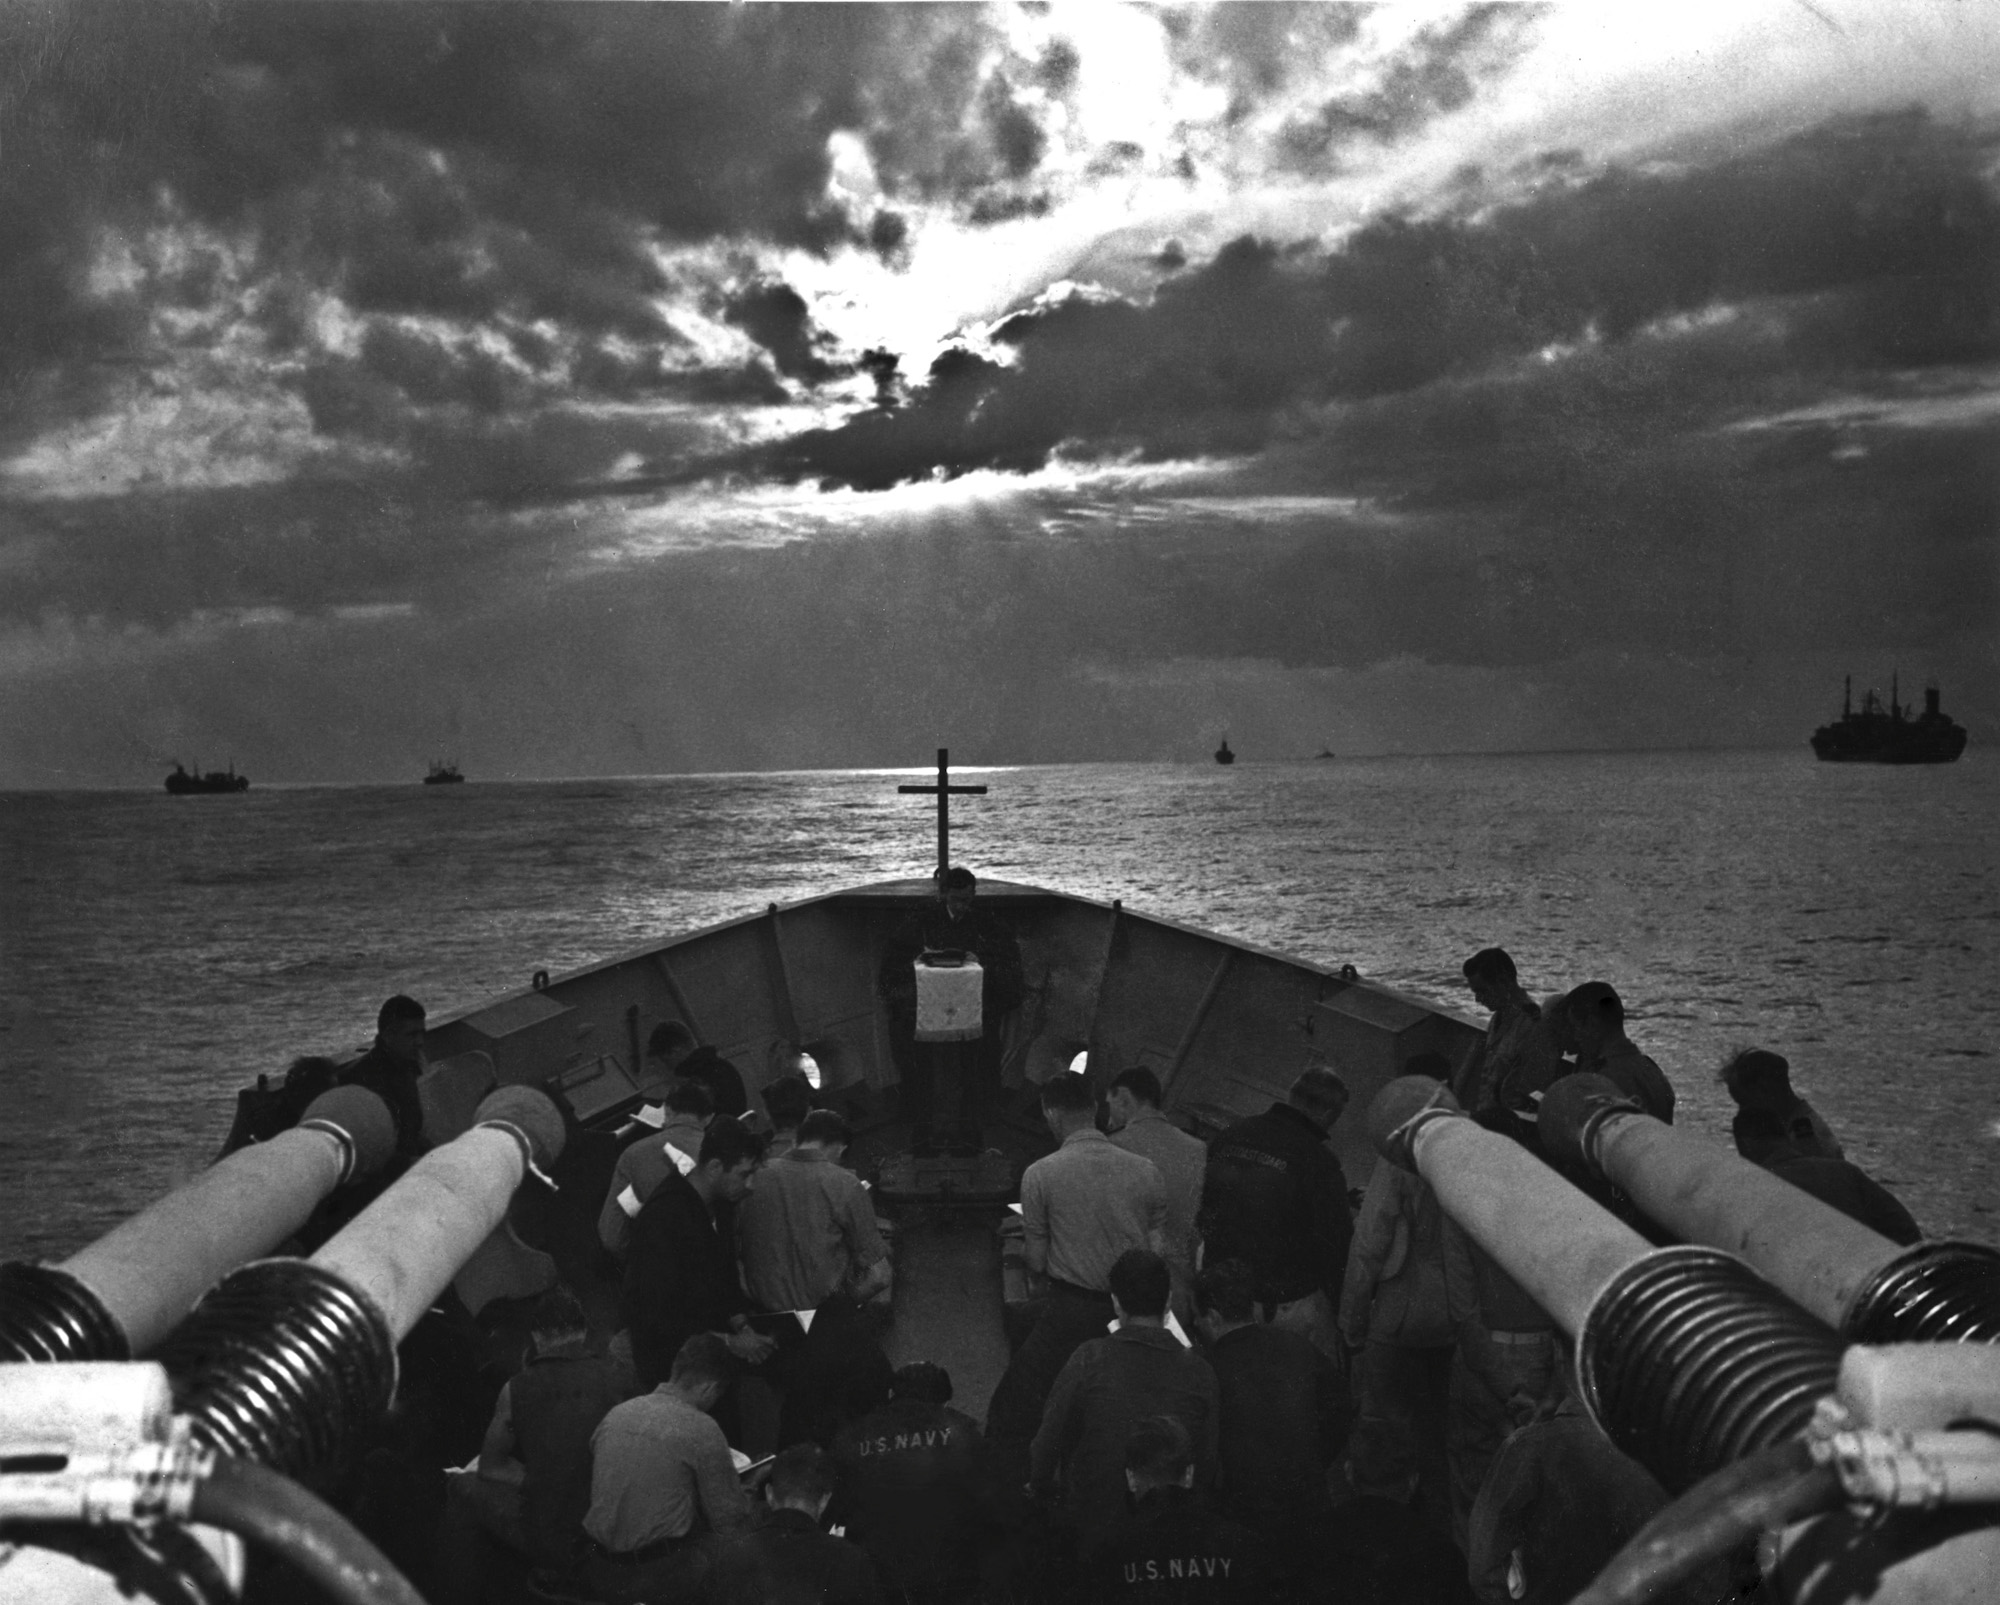 This photograph was taken Easter Sunday, April 9th, 1944 aboard the USS Duane. This photograph was scanned from my grandfather John "Jack" Baker's Warbook. If you look closely, you will see a cross at the bow of the boat, behind a chaplain reading from a bible. I find this photograph particularly beautiful, with the sun rising between the clouds across the front of the ship. There is a stark contrast between the peacefulness of the men reading, and the reality of the massive guns pointed above their heads. This photograph wasn't marked, but it was likely taken by Dale Rooks. There are no identifiable men in the photograph. View full size.